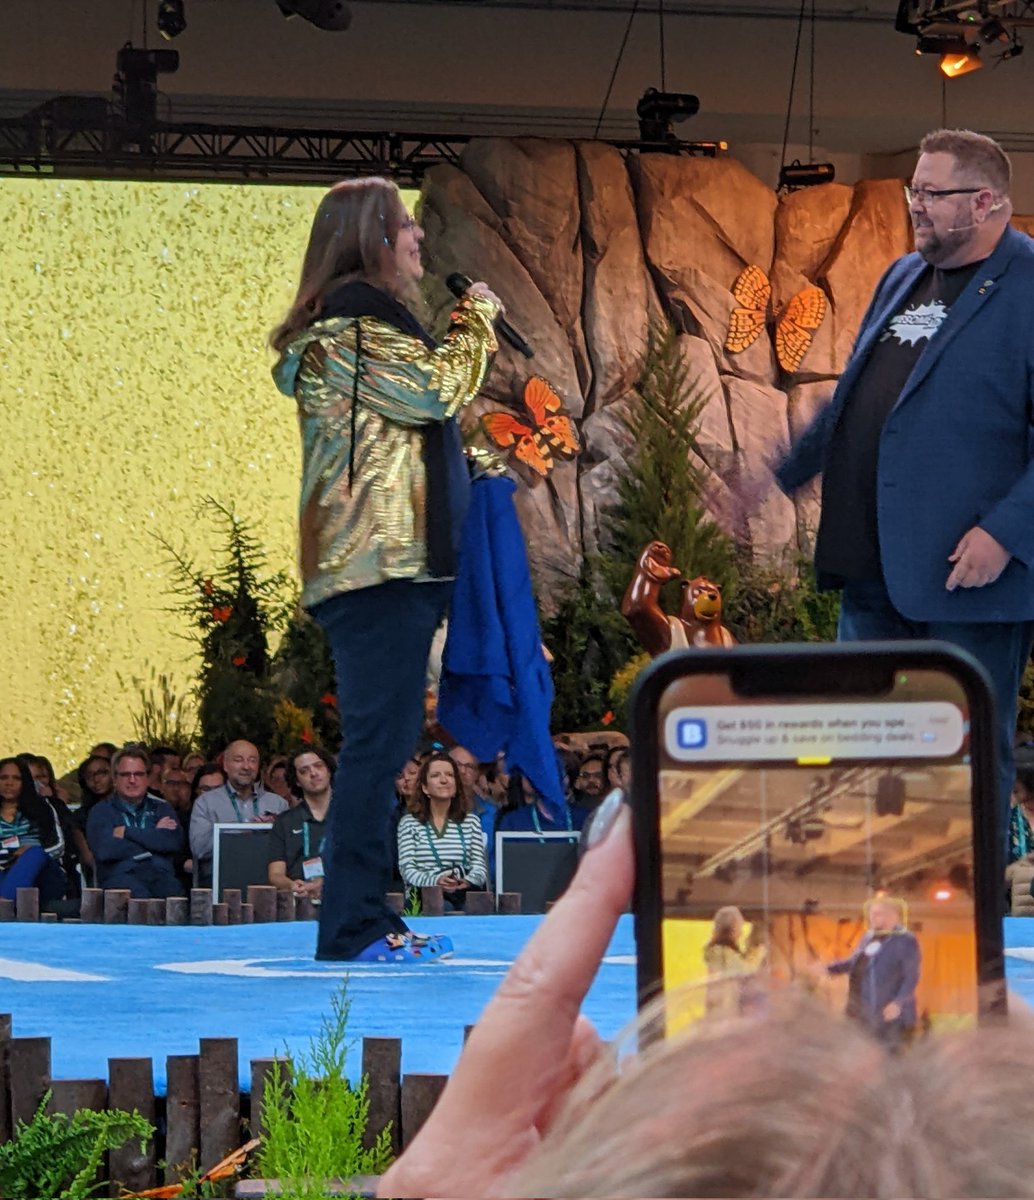 Congratulations and welcome to the #LifeWithGoldie family to my fellow #SalesforceMVP and friend @mehansen82